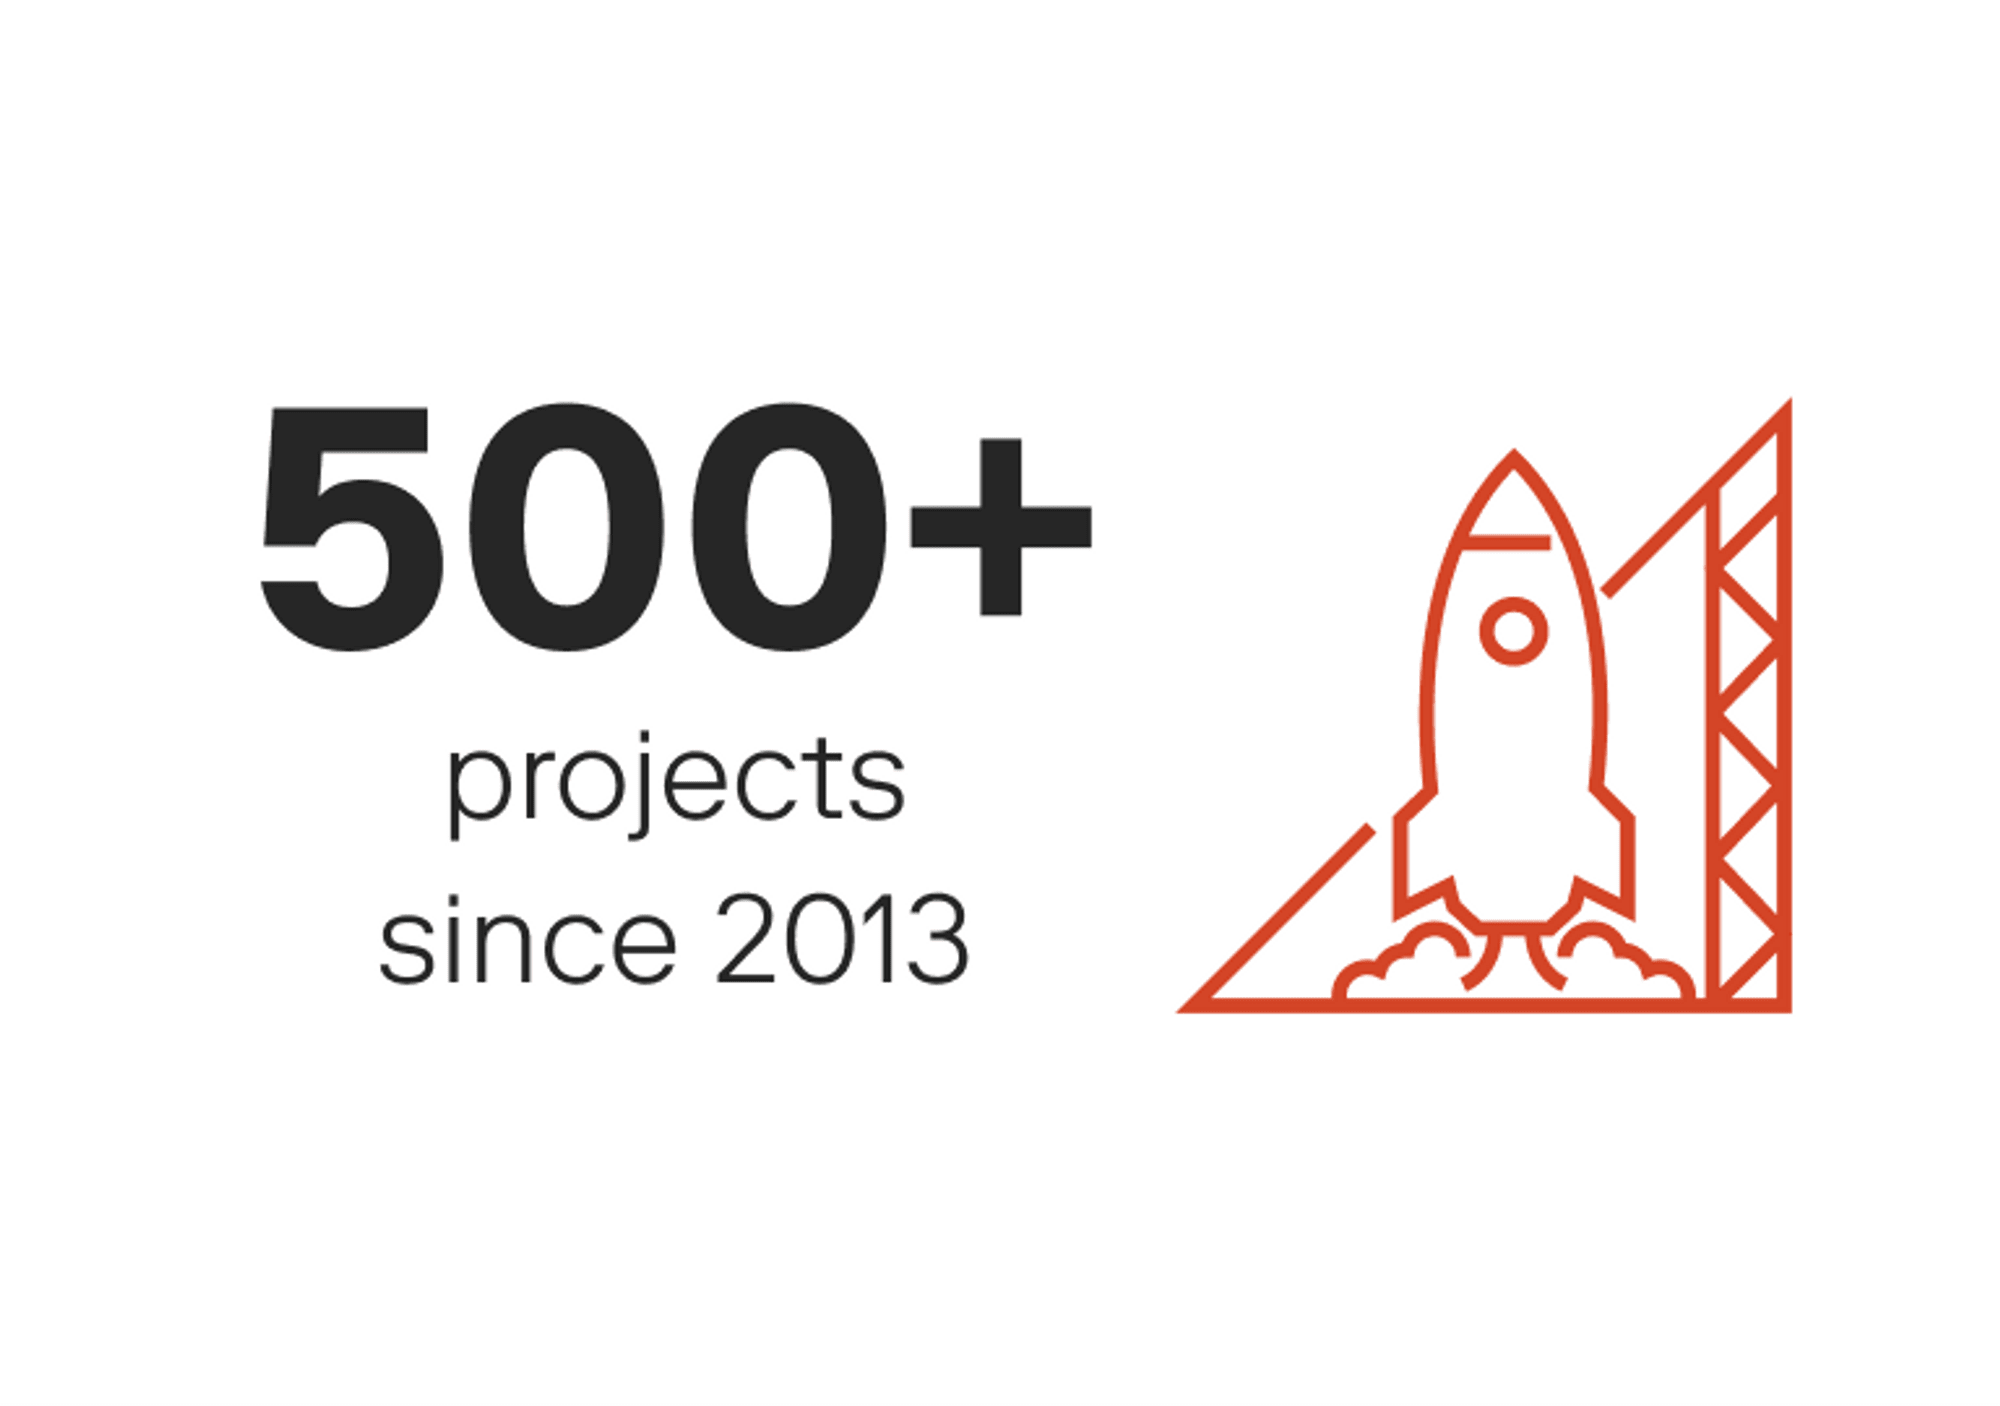 Drawing of a rocket ship taking off with text indicating 500+ projects completed since 2013